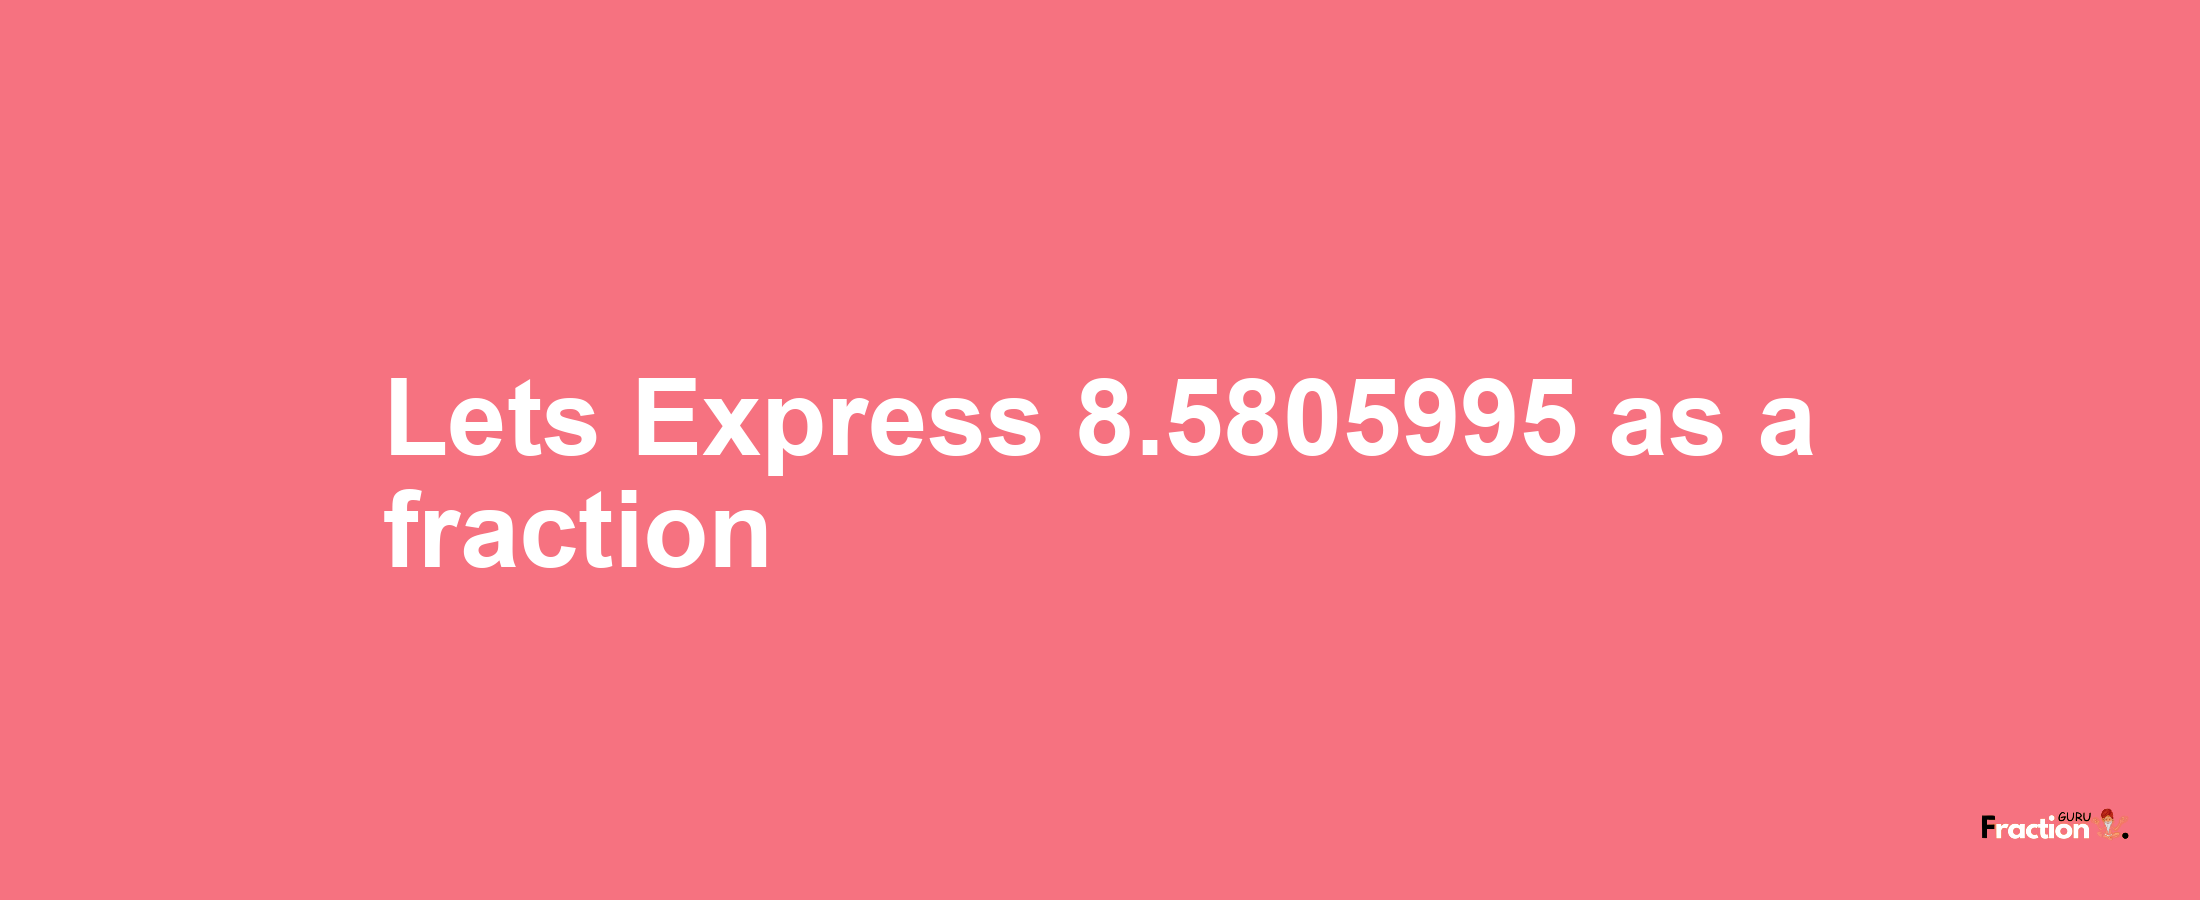 Lets Express 8.5805995 as afraction